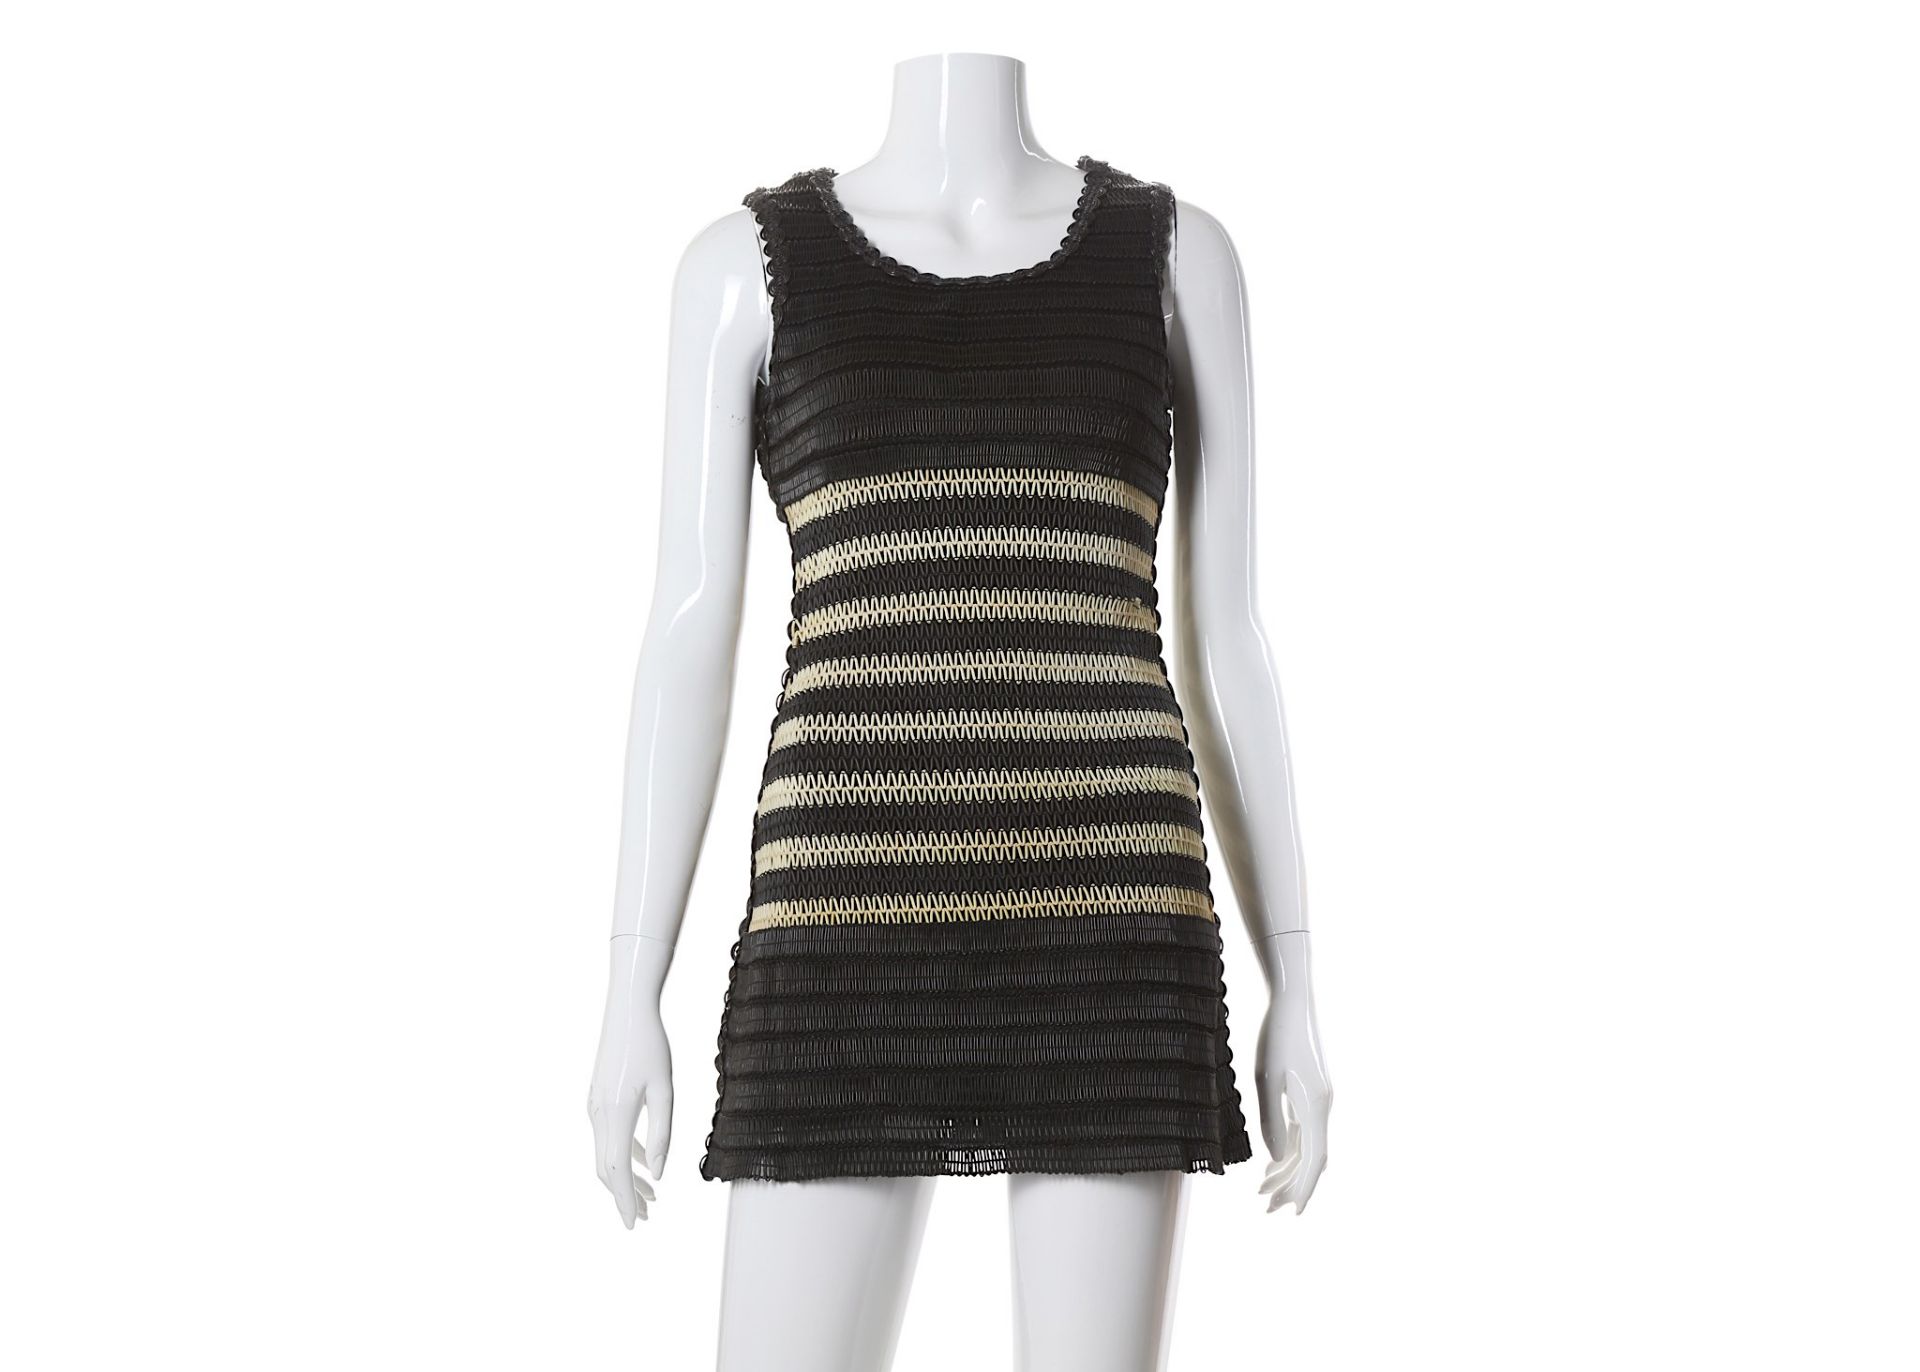 Chanel Boutique Black Rubber Piping Dress, sleeveless design with cream rubber detail, size 38 (UK